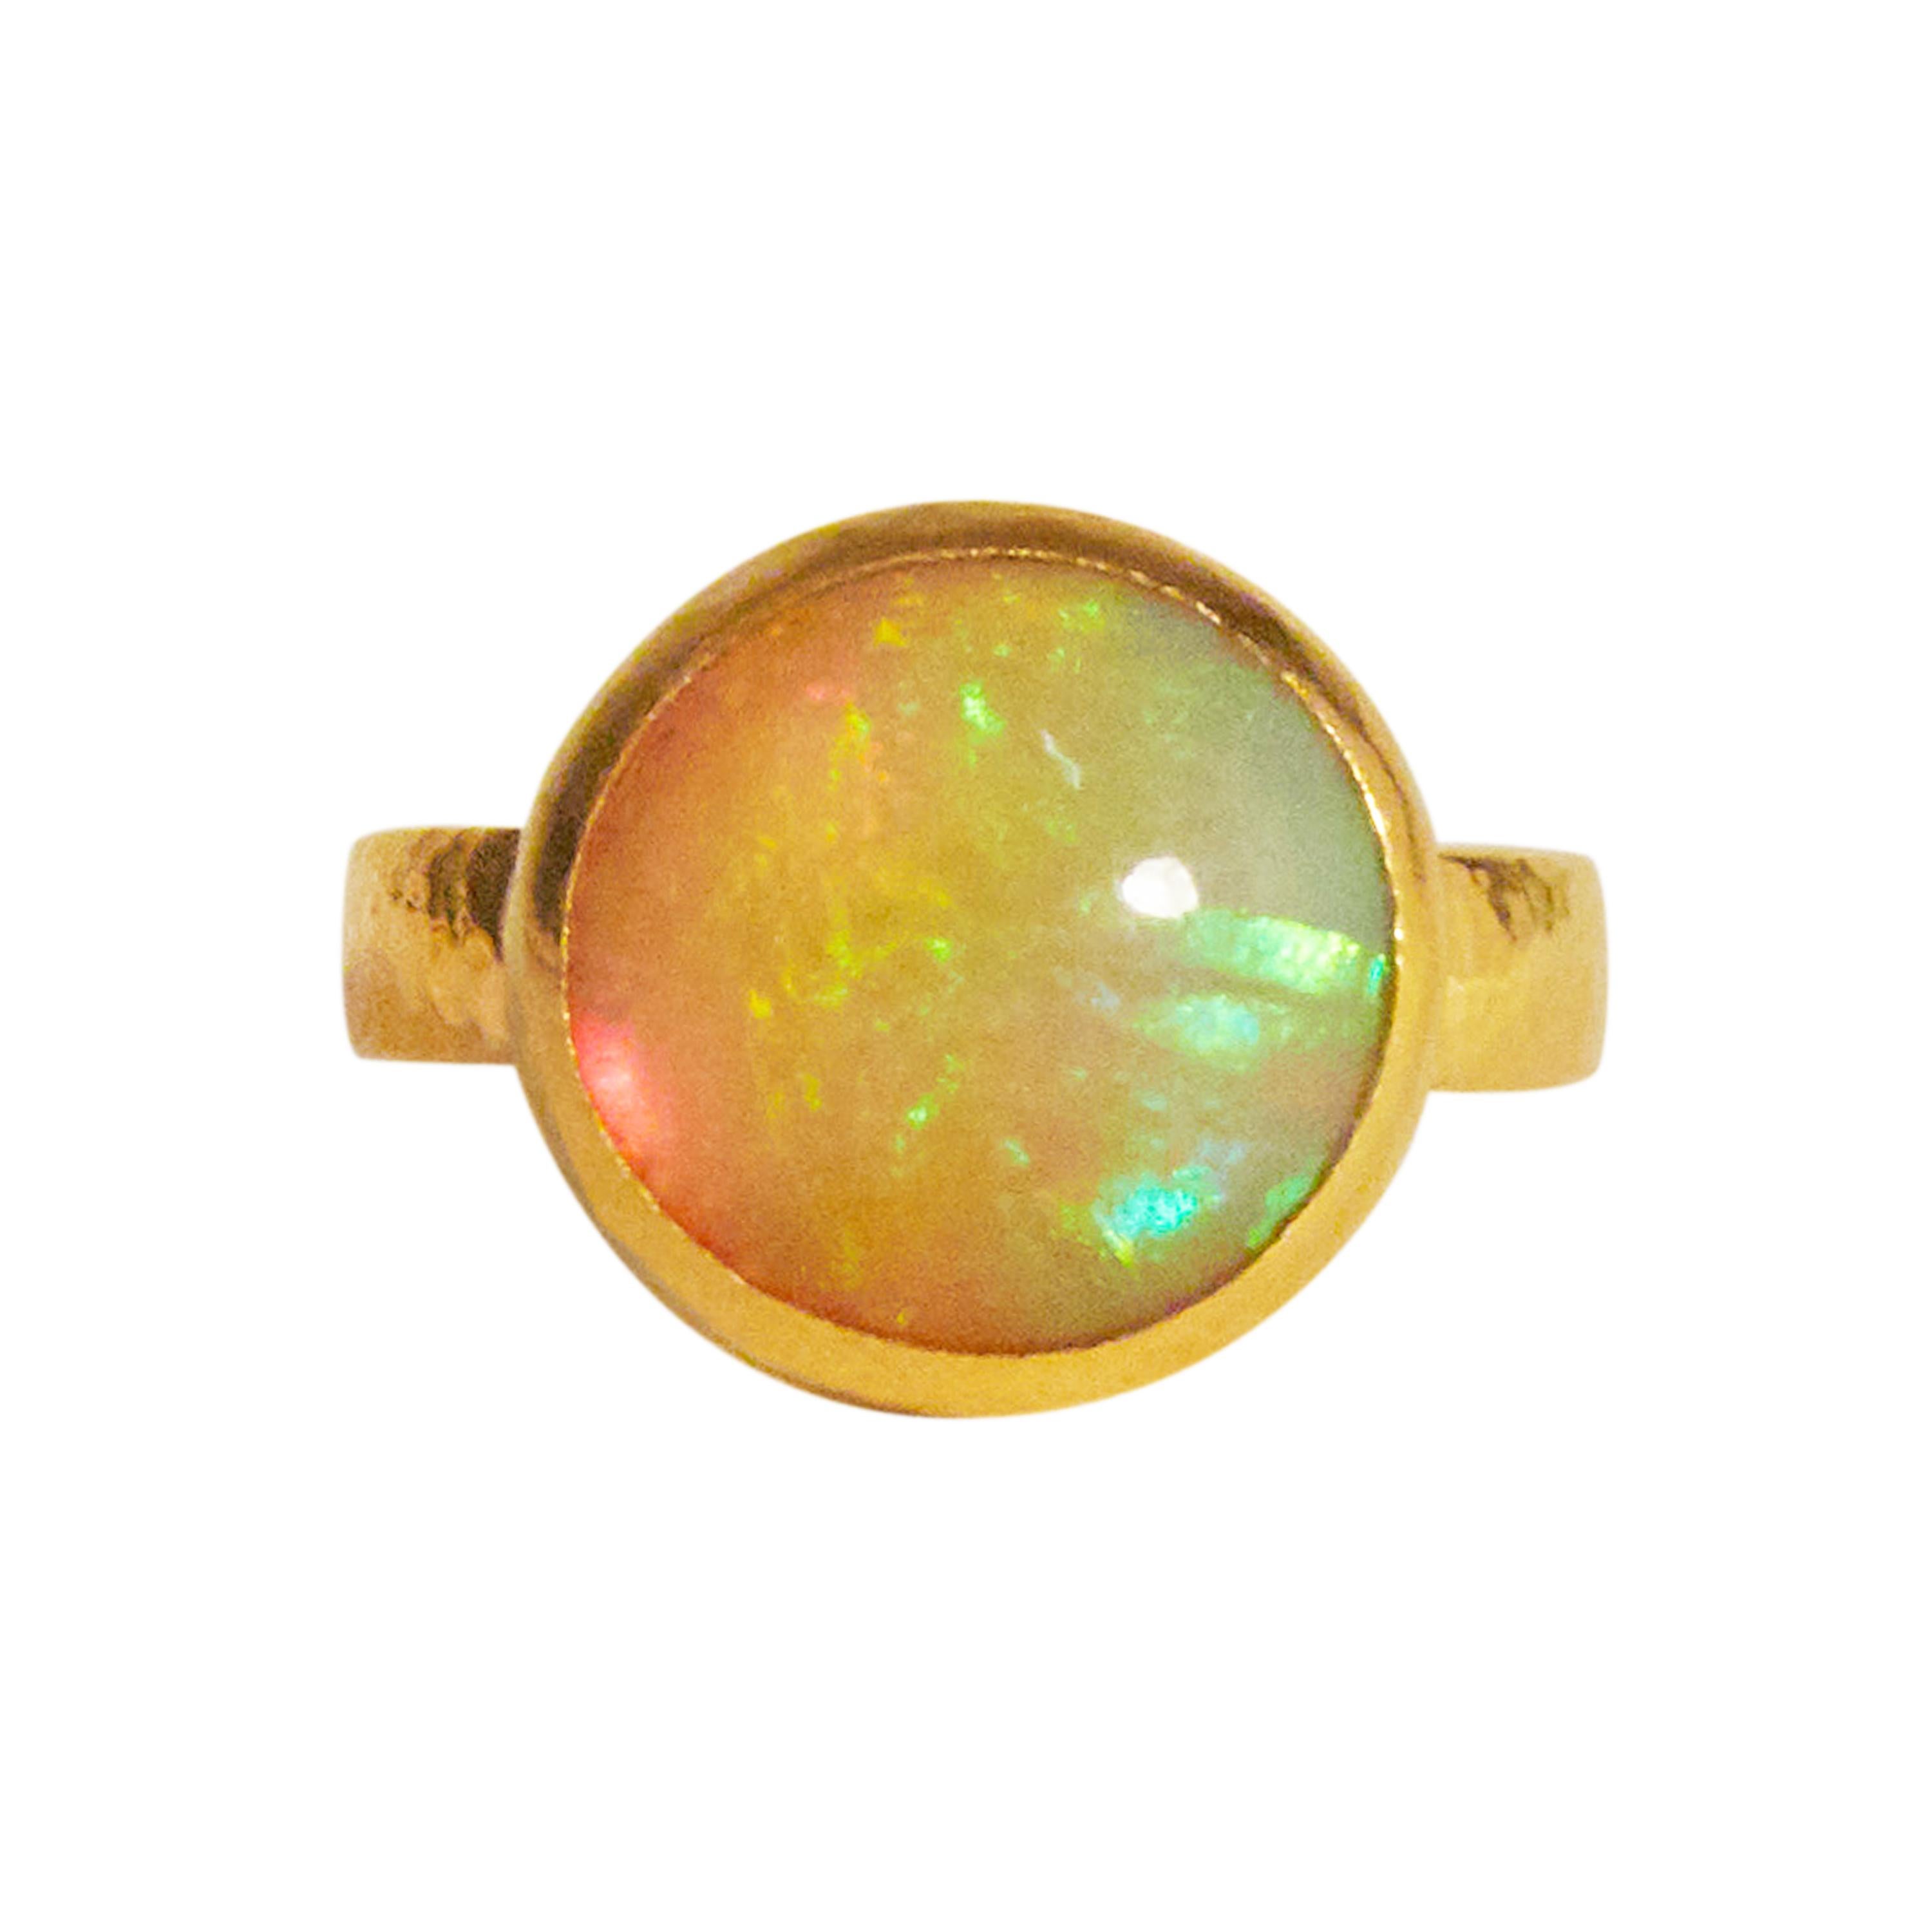 GURHAN one-of-a-kind ring set in 24 Karat hammered yellow gold featuring a 13mm round cabochon Ethiopian Opal, 7.02cts. Bezel stone setting, 22 Karat hammered yellow gold shank, size 6.5.